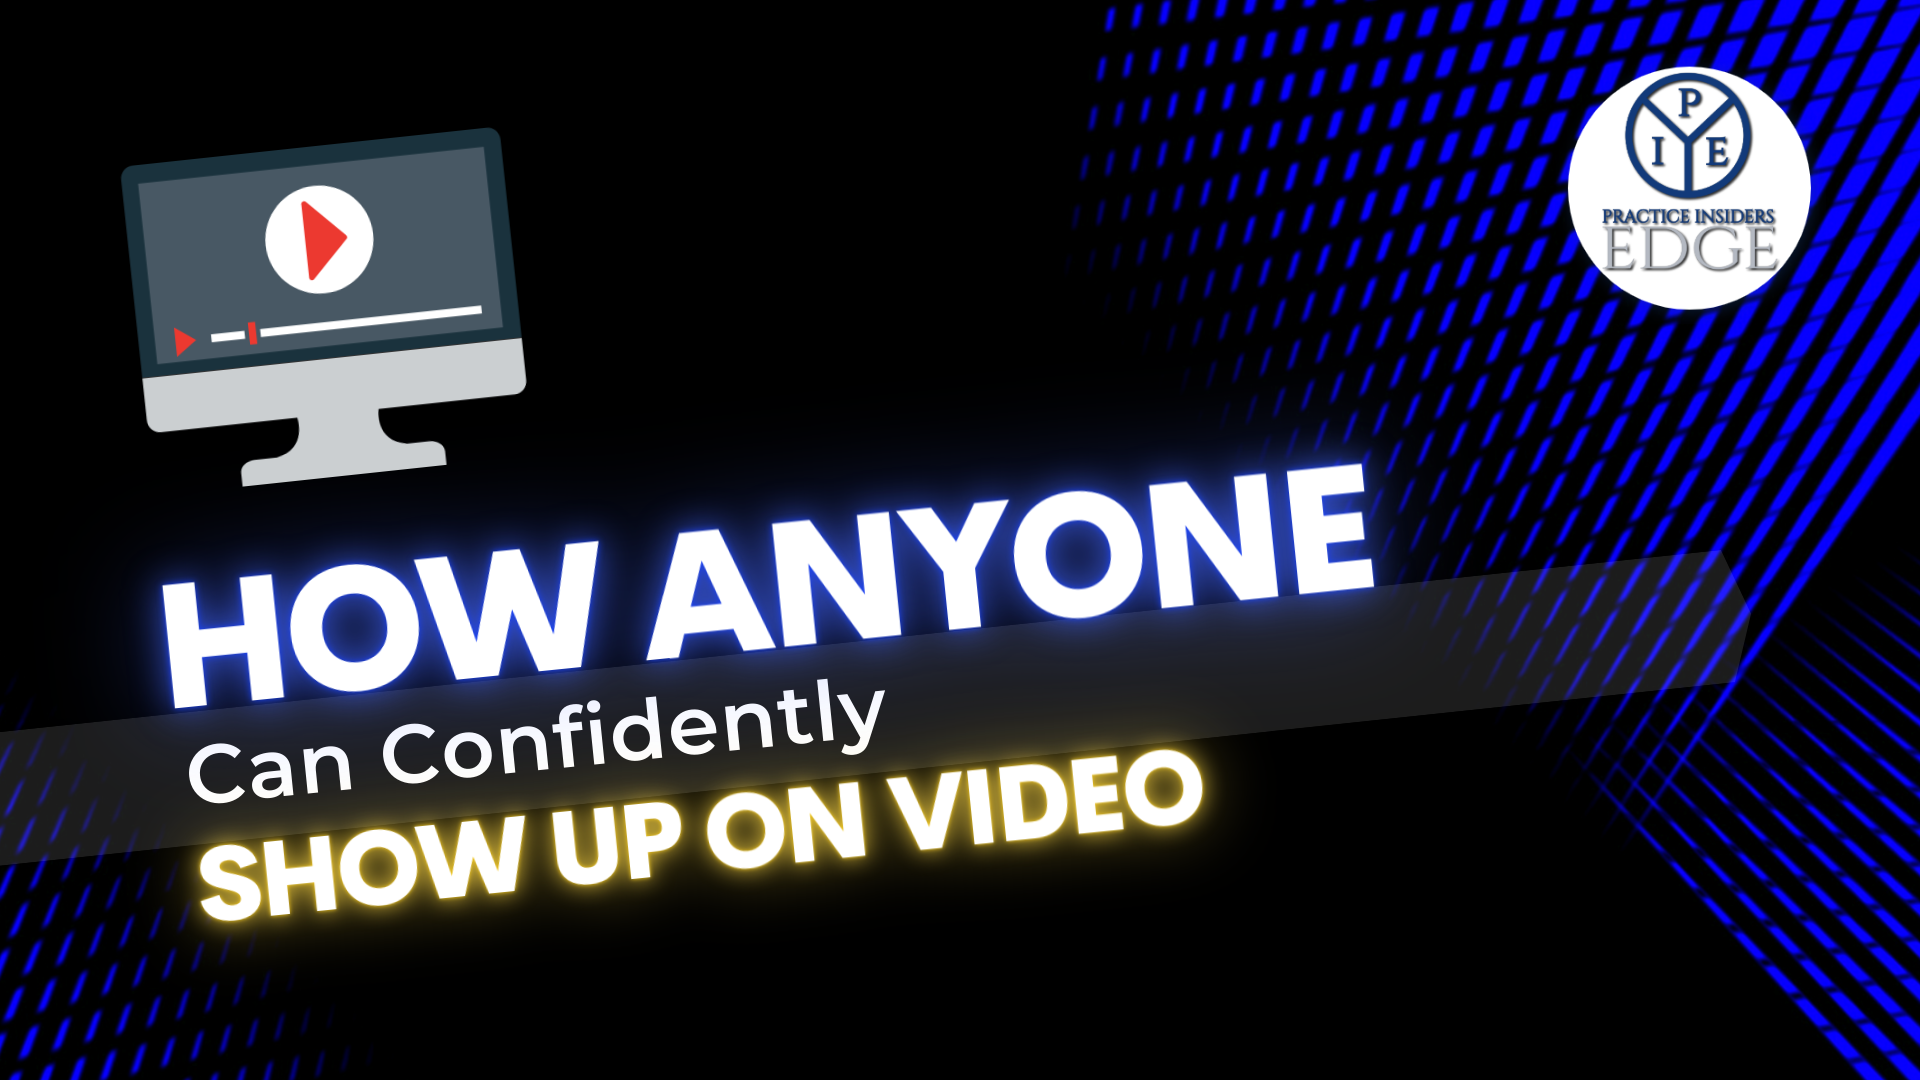 Here’s How To Confidently Show Up For Your Practice on Video and Attract New Patients